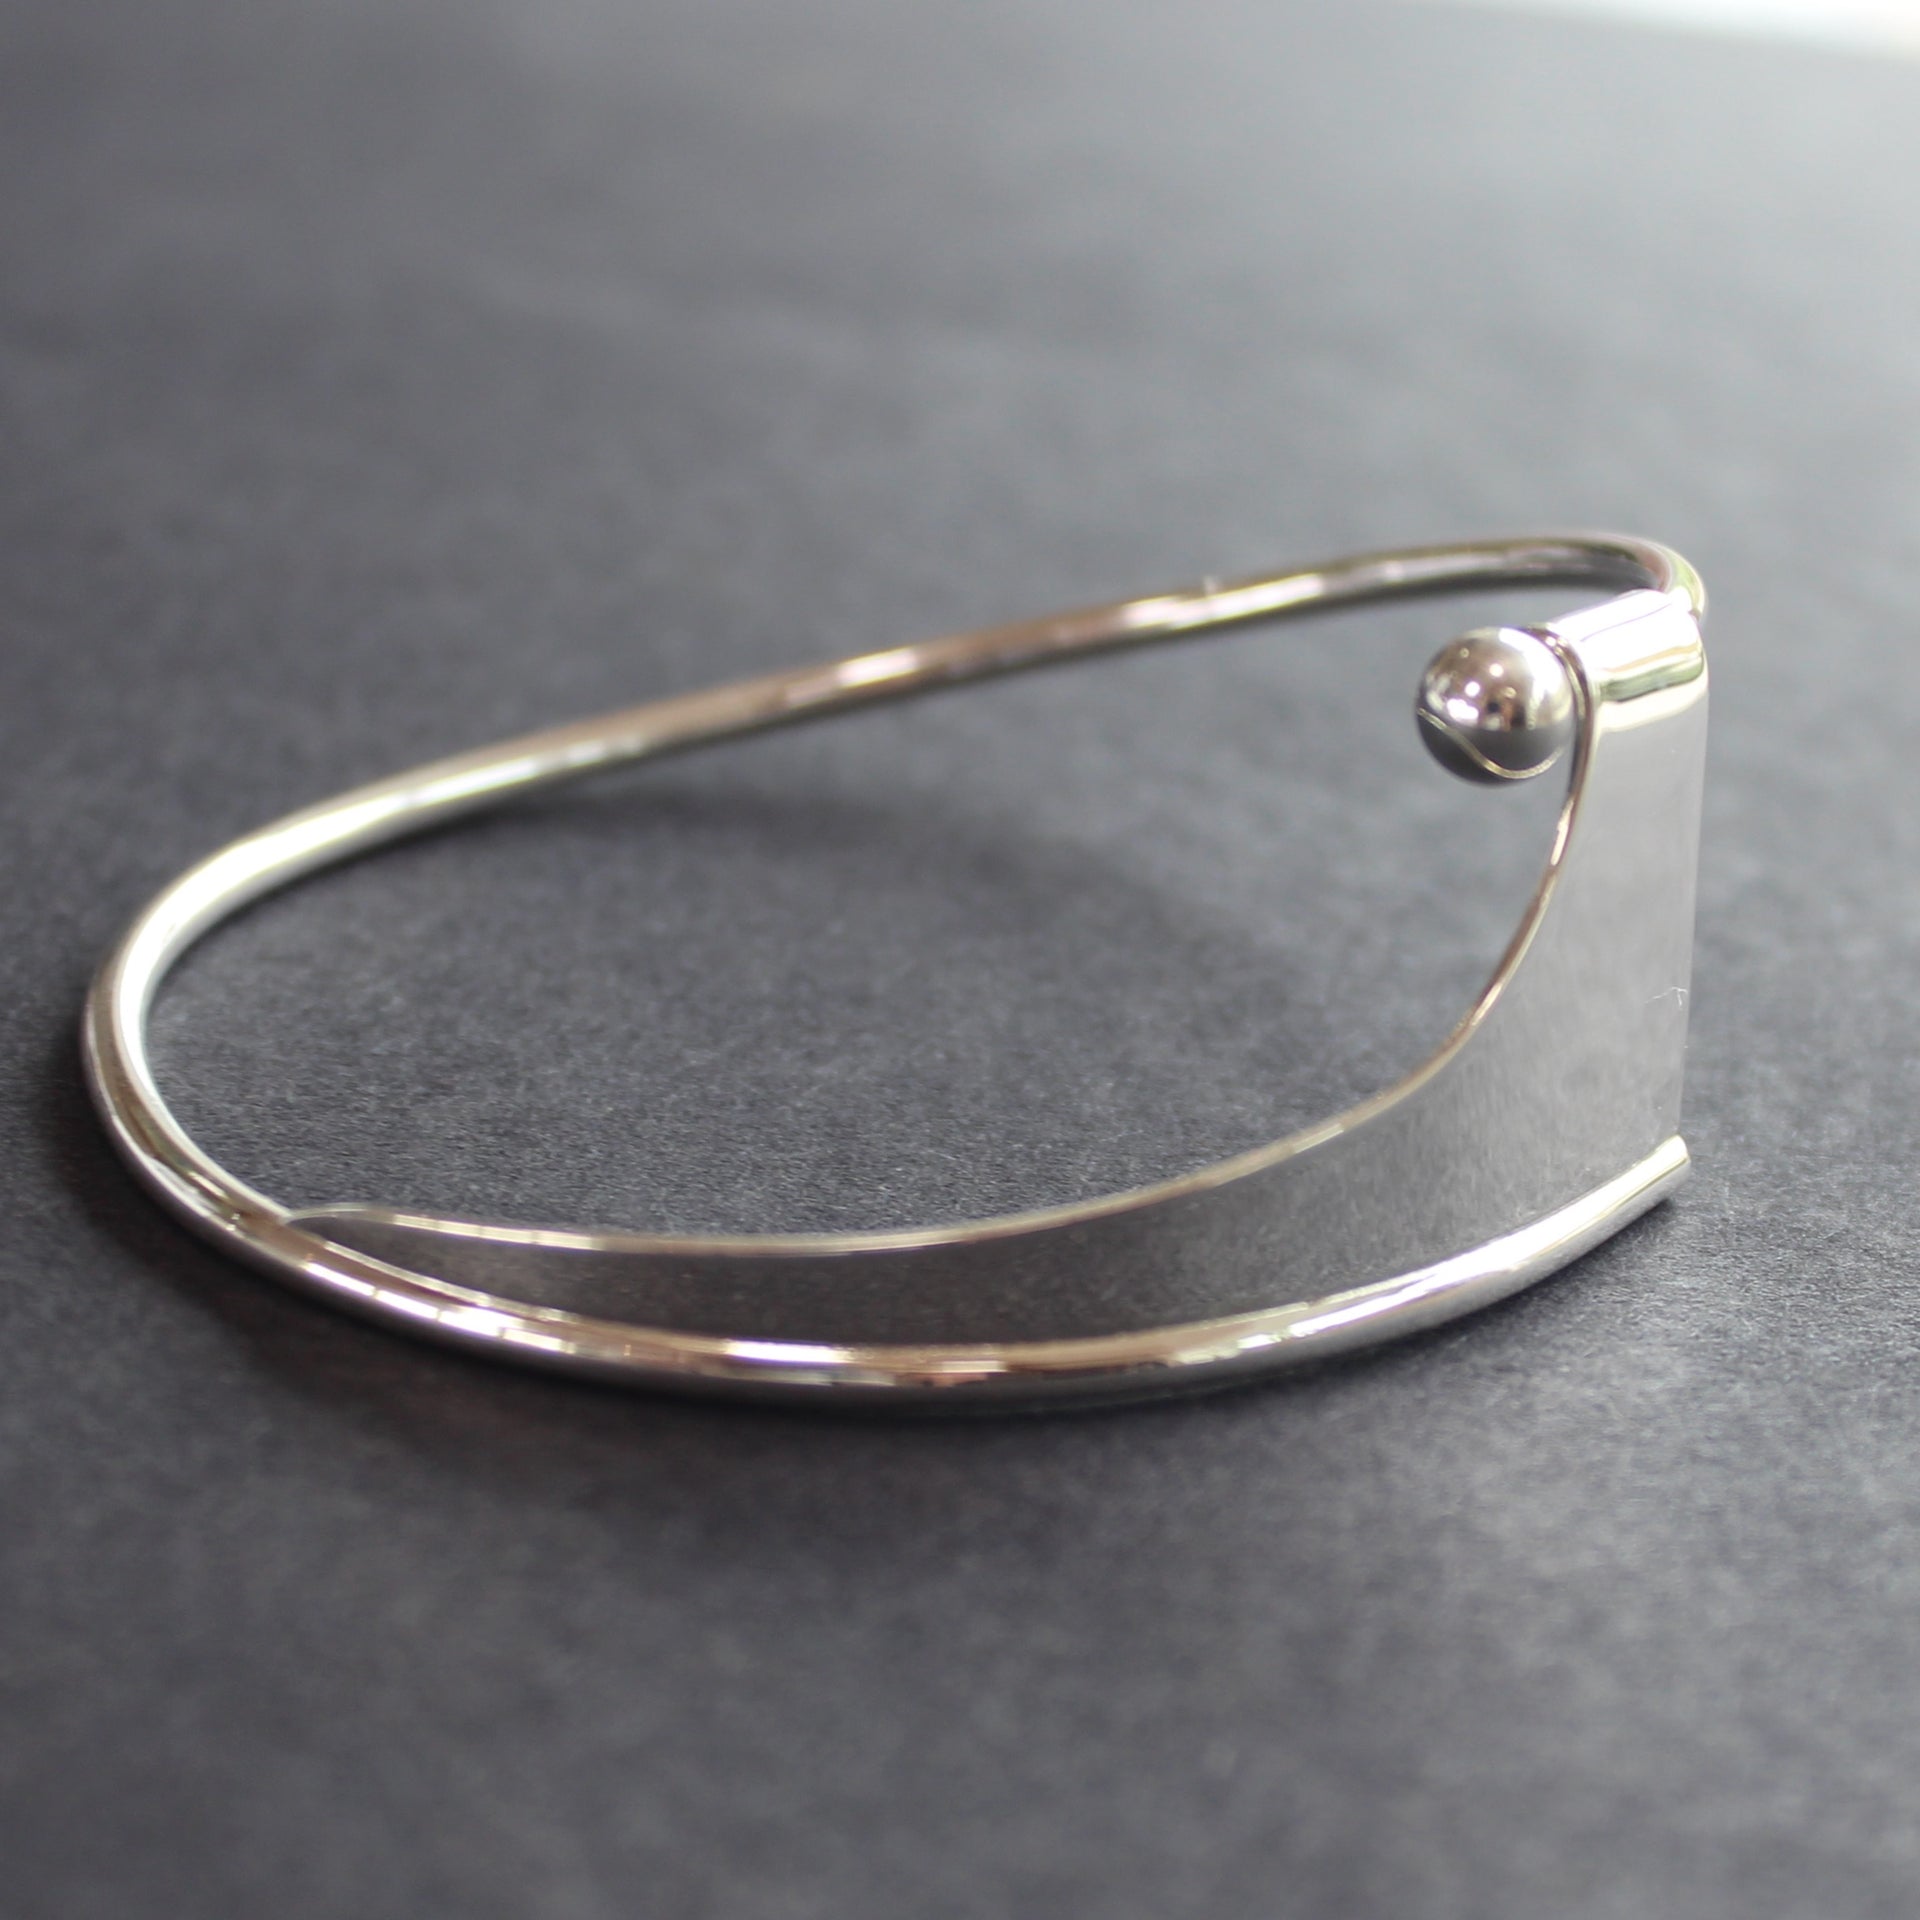 Abstract silver Ancien bangle by Beverly Bartlett